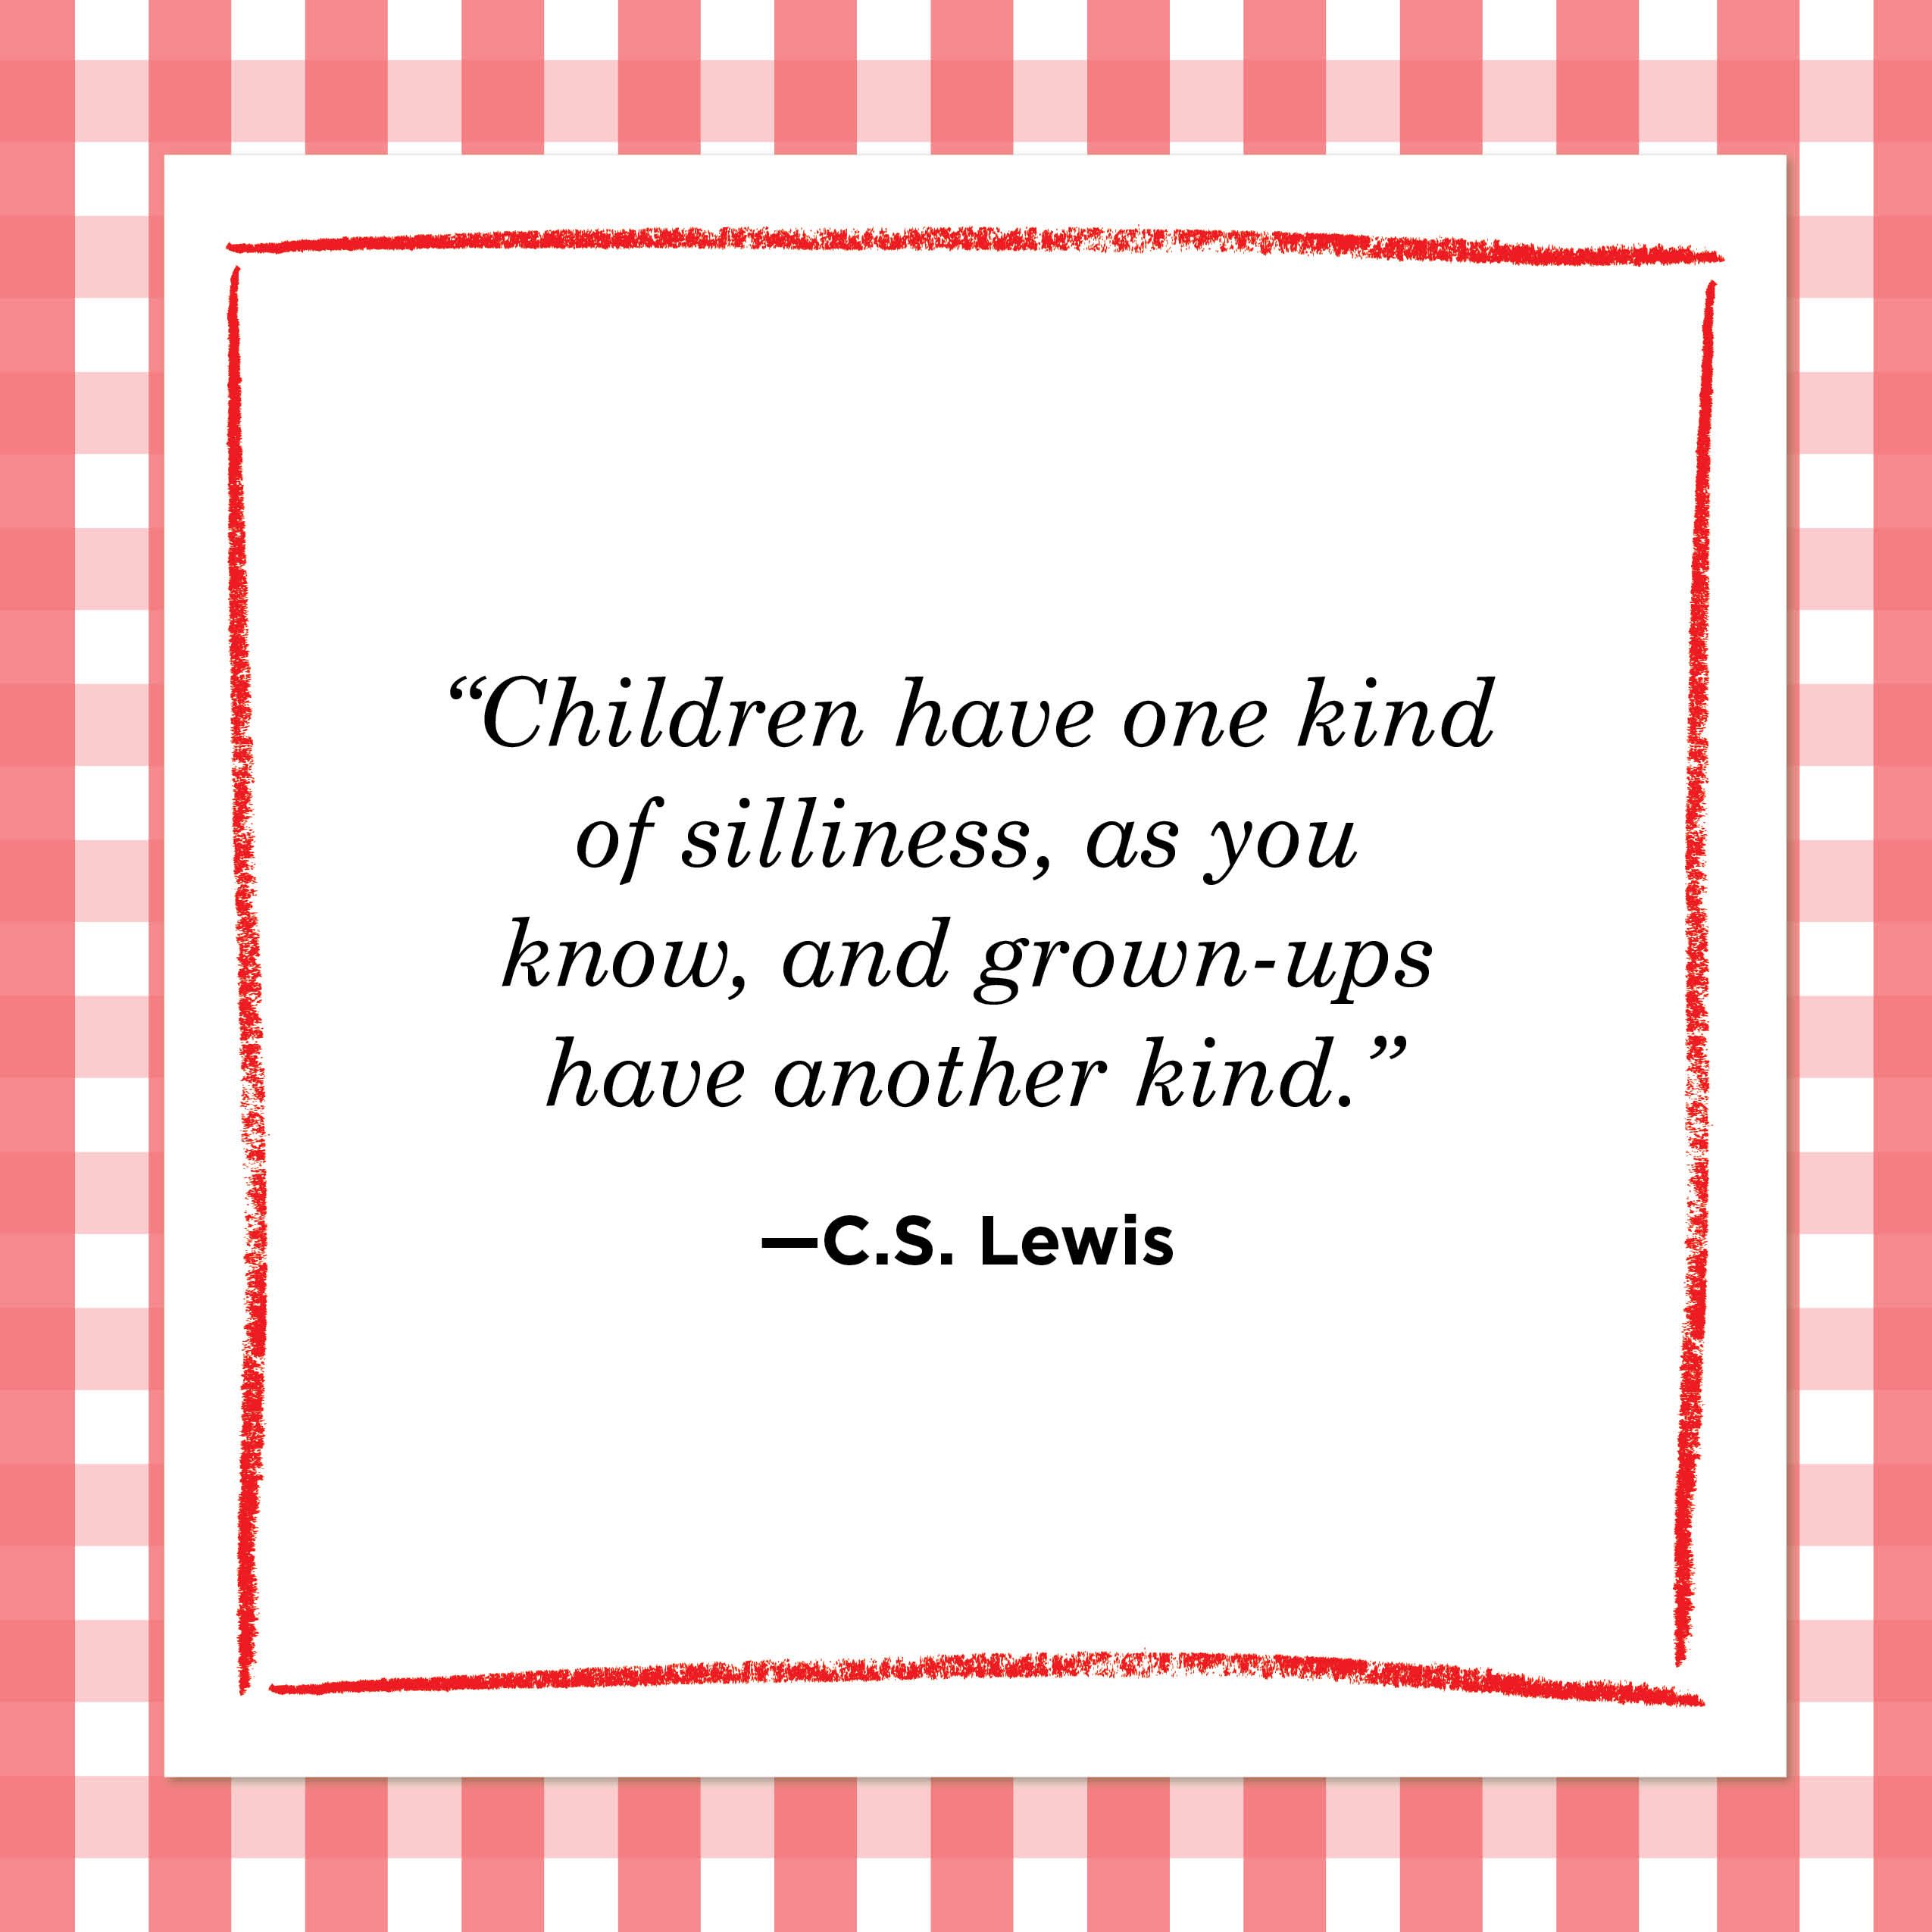 quotes about children growing up